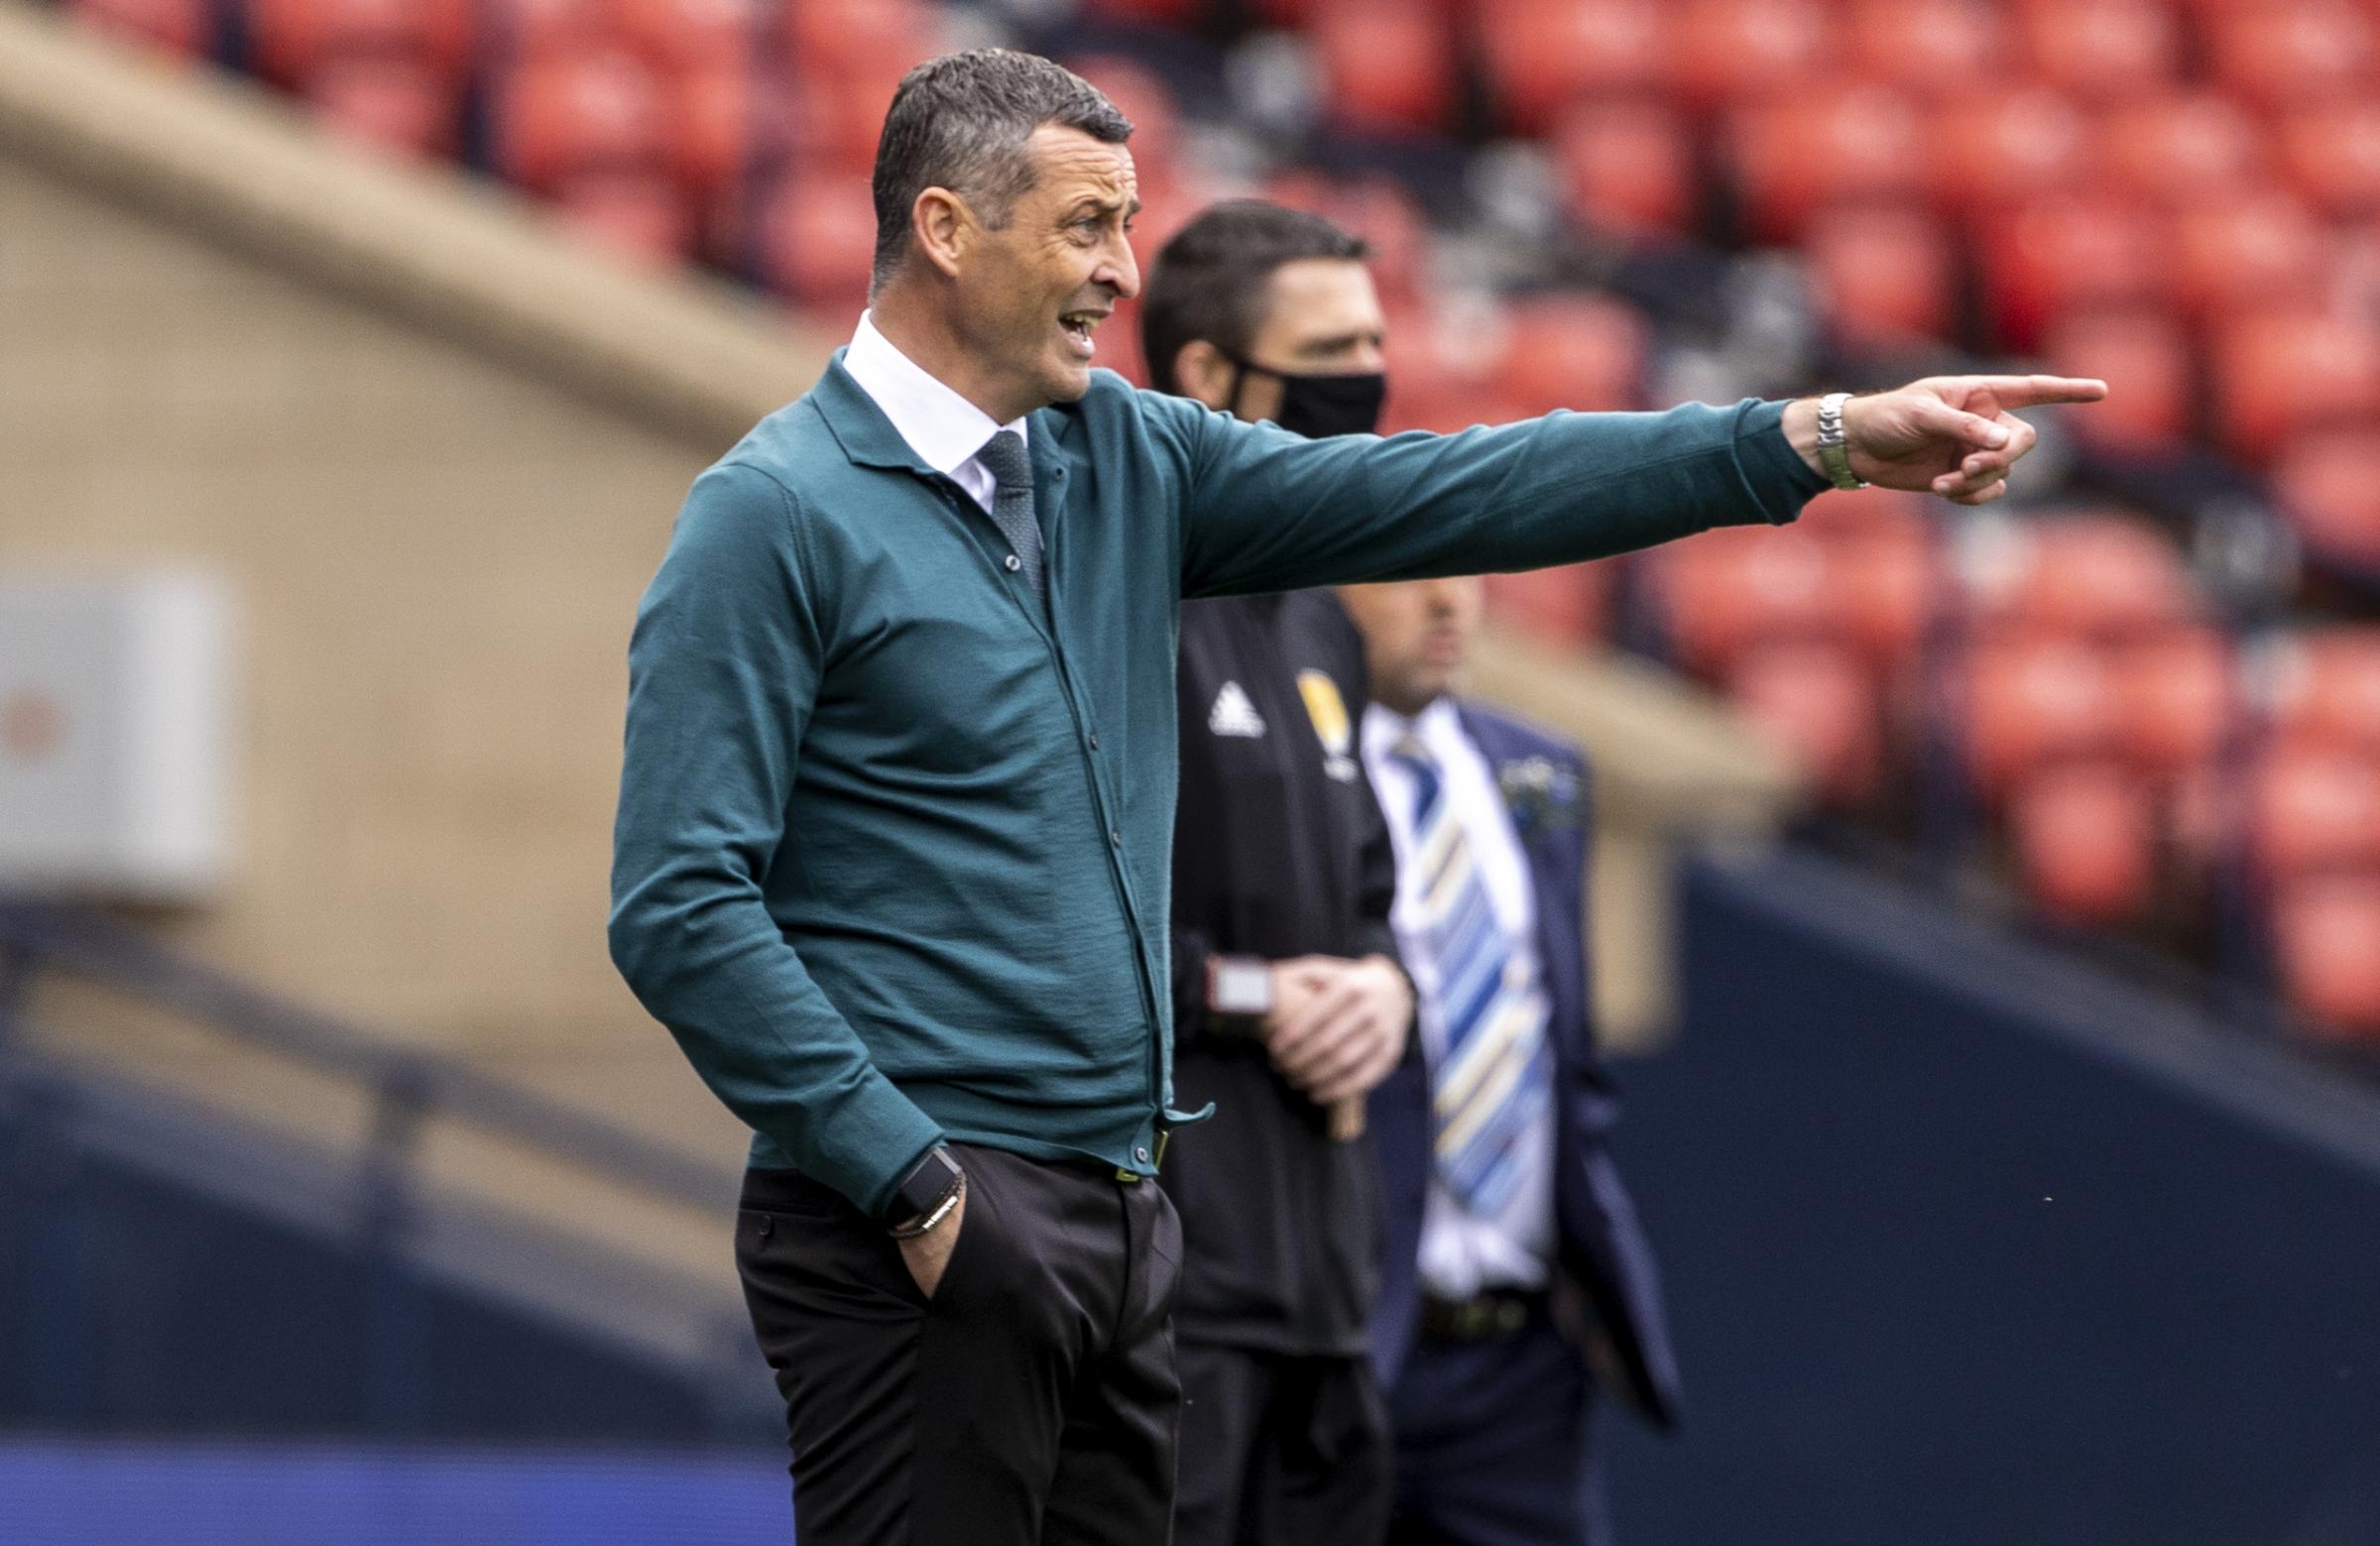 Hibs 2021/22 preview: Time for Jack Ross to shake off pressure to build on third-place and cup final last term